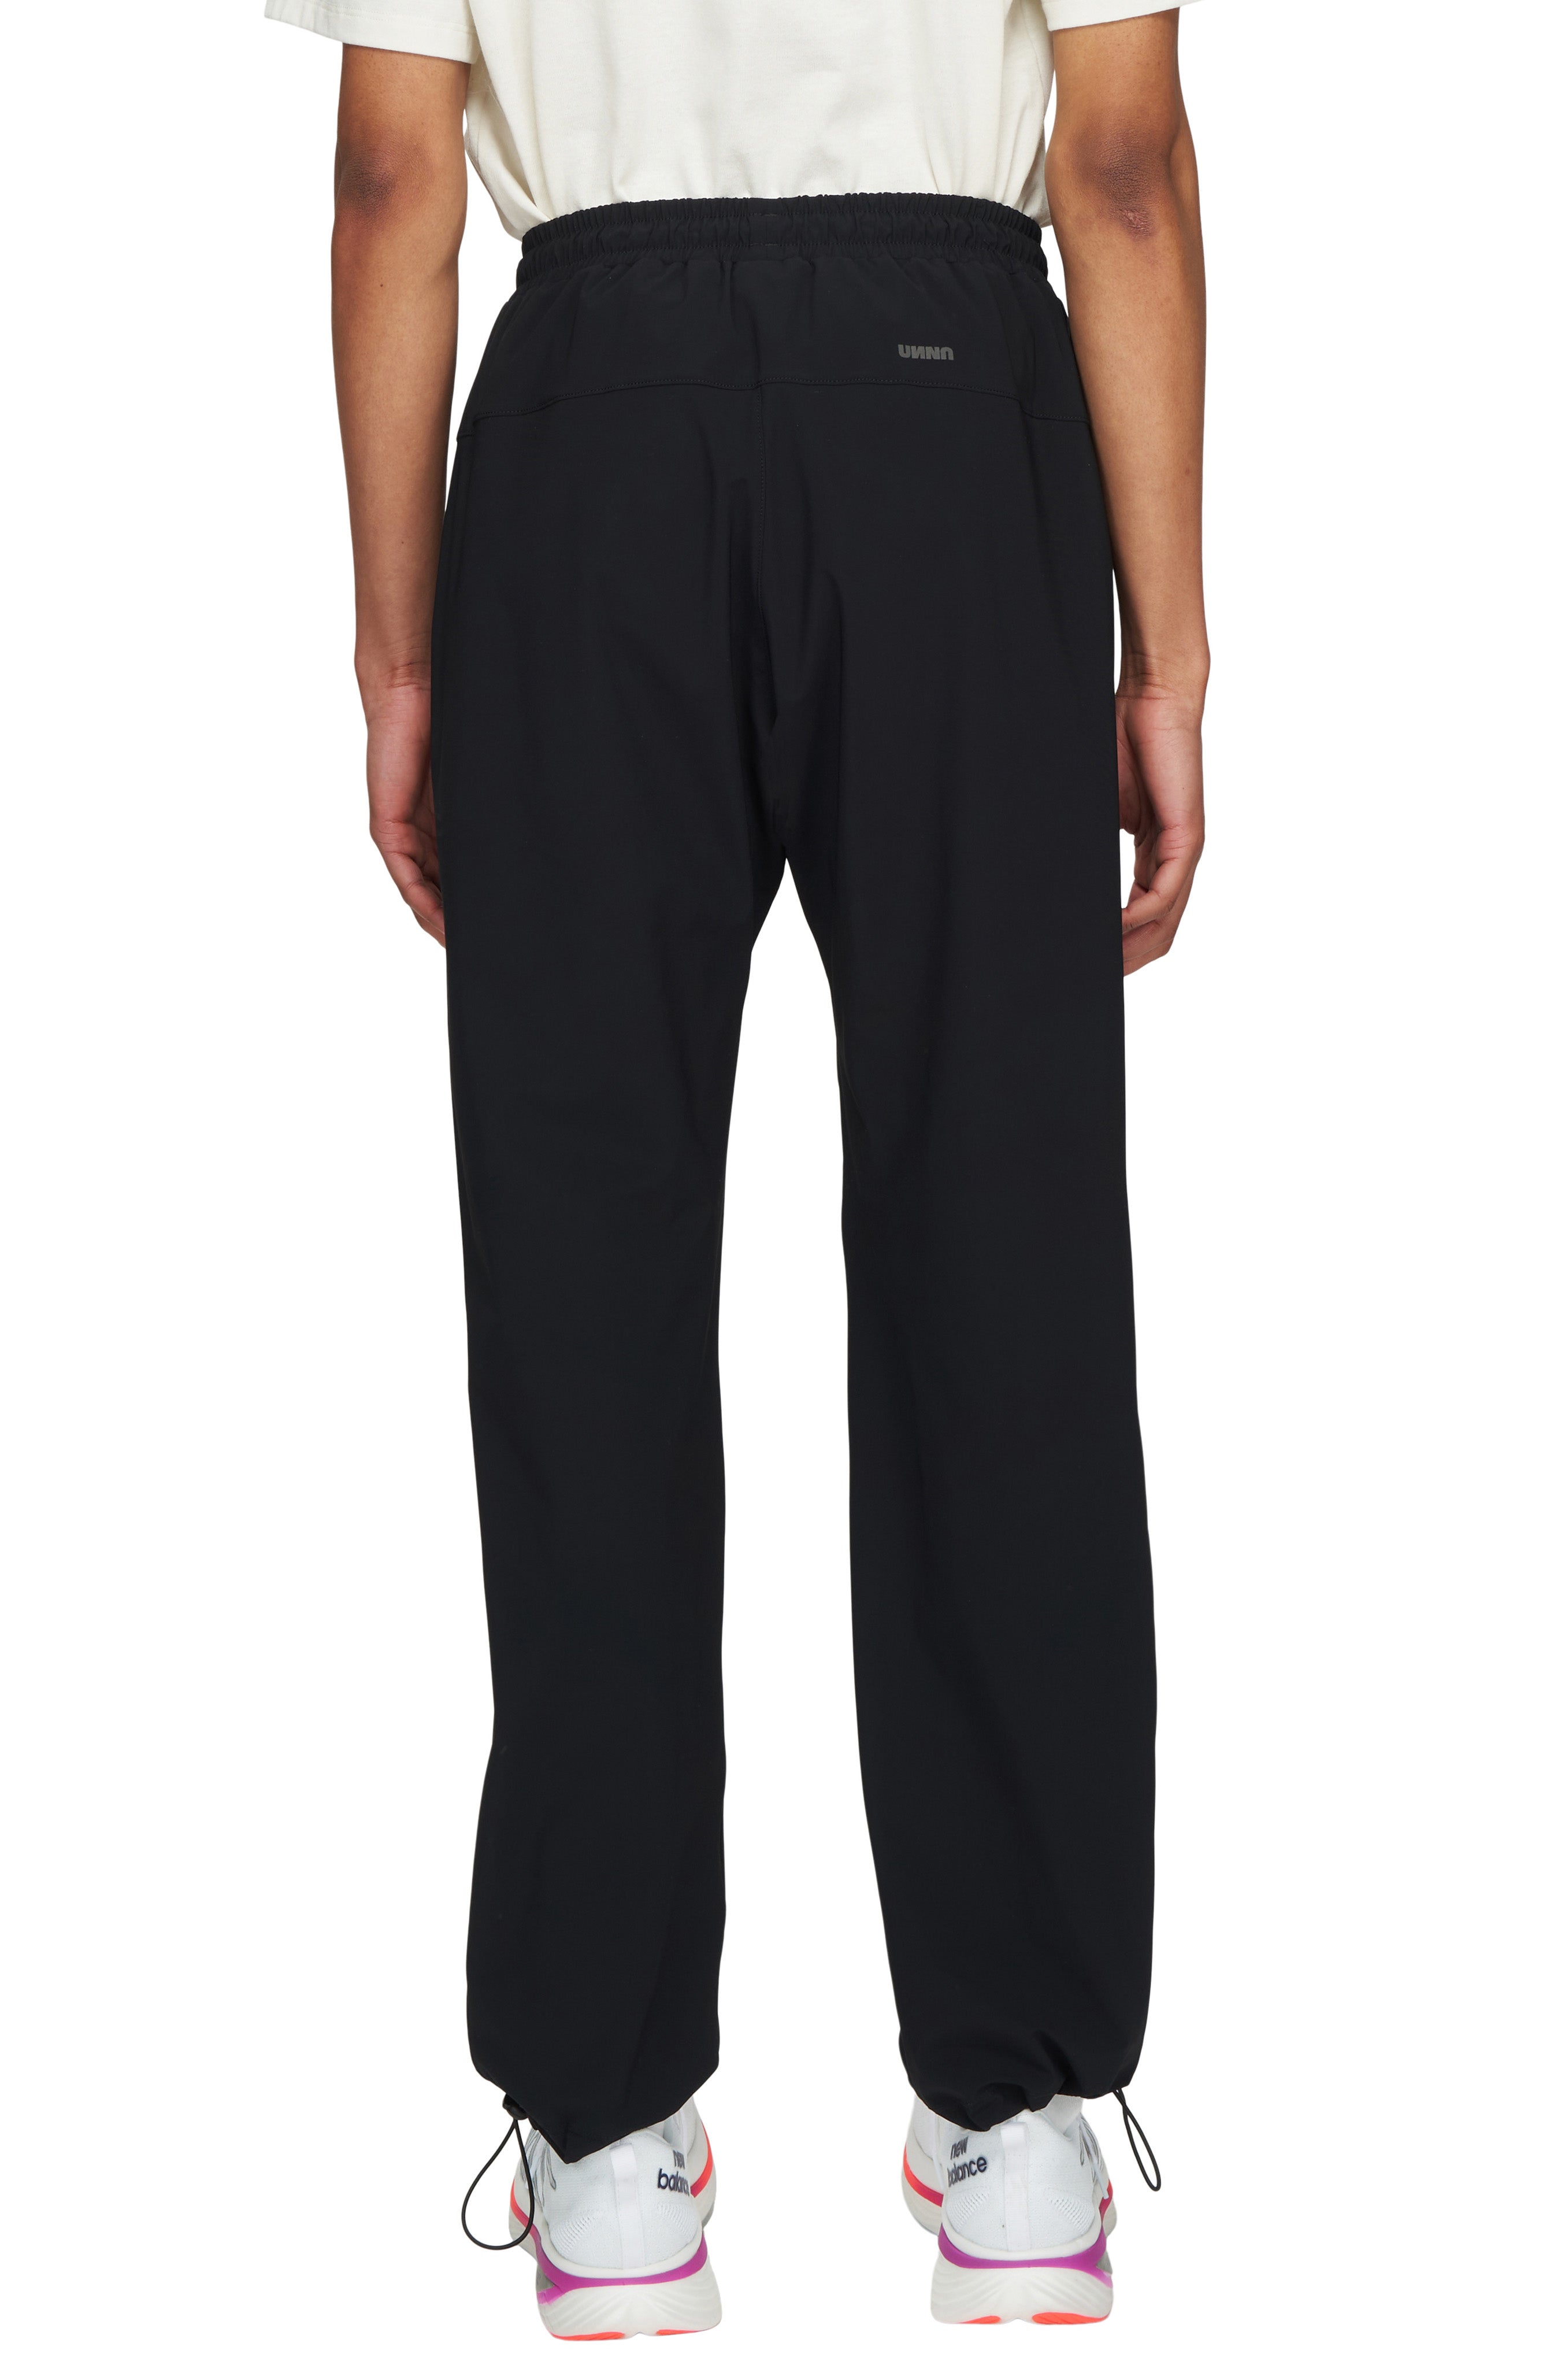 UNNA straight black running pants for men with a soft stretch and two front pockets.